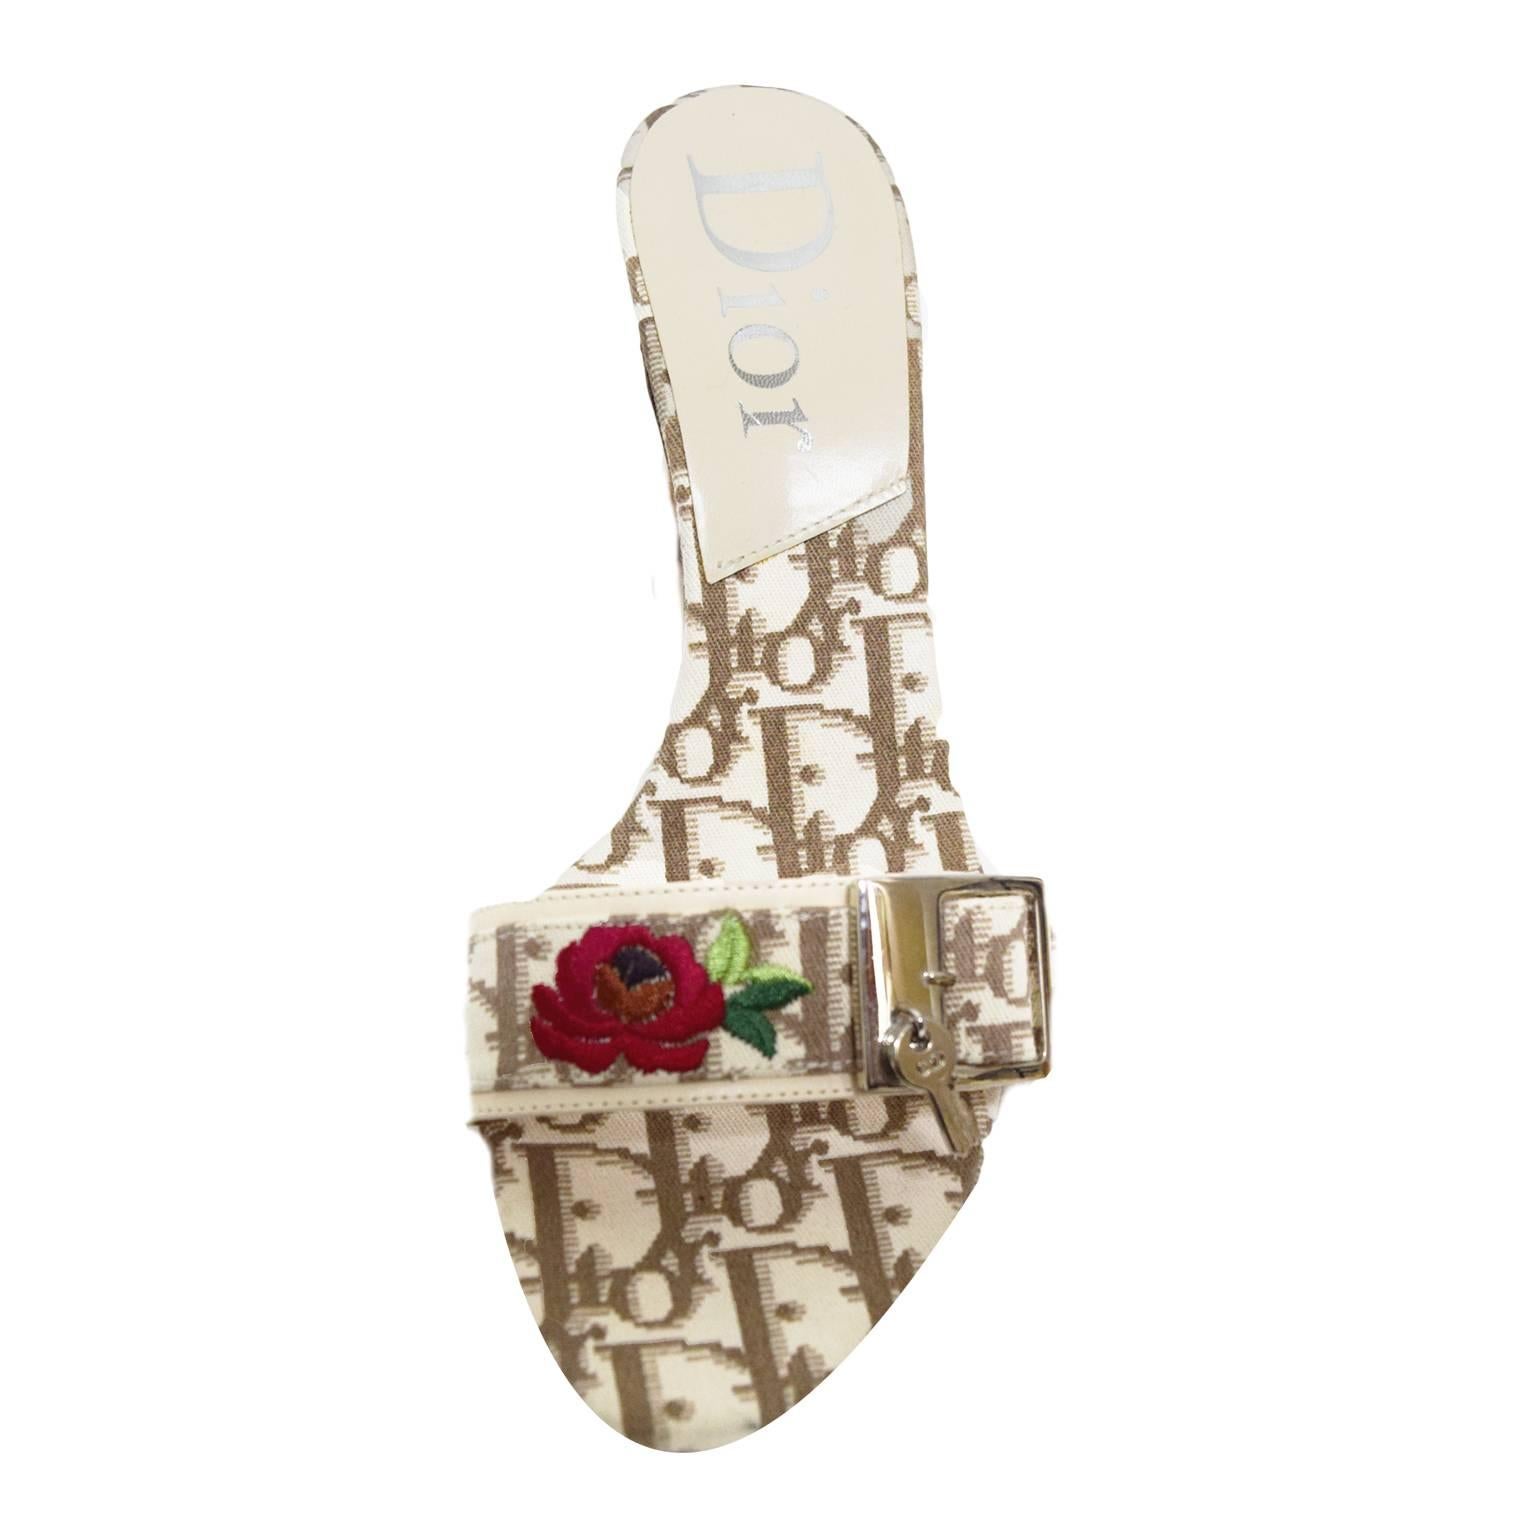 These Dior Sandal Heels are great for summer. The upper strap and inner sole is incased in monogramed ivory and espresso printed fabric. The heel is a short cube heel that measures at 3 inches high. On the upper strap is a embroidered floral design